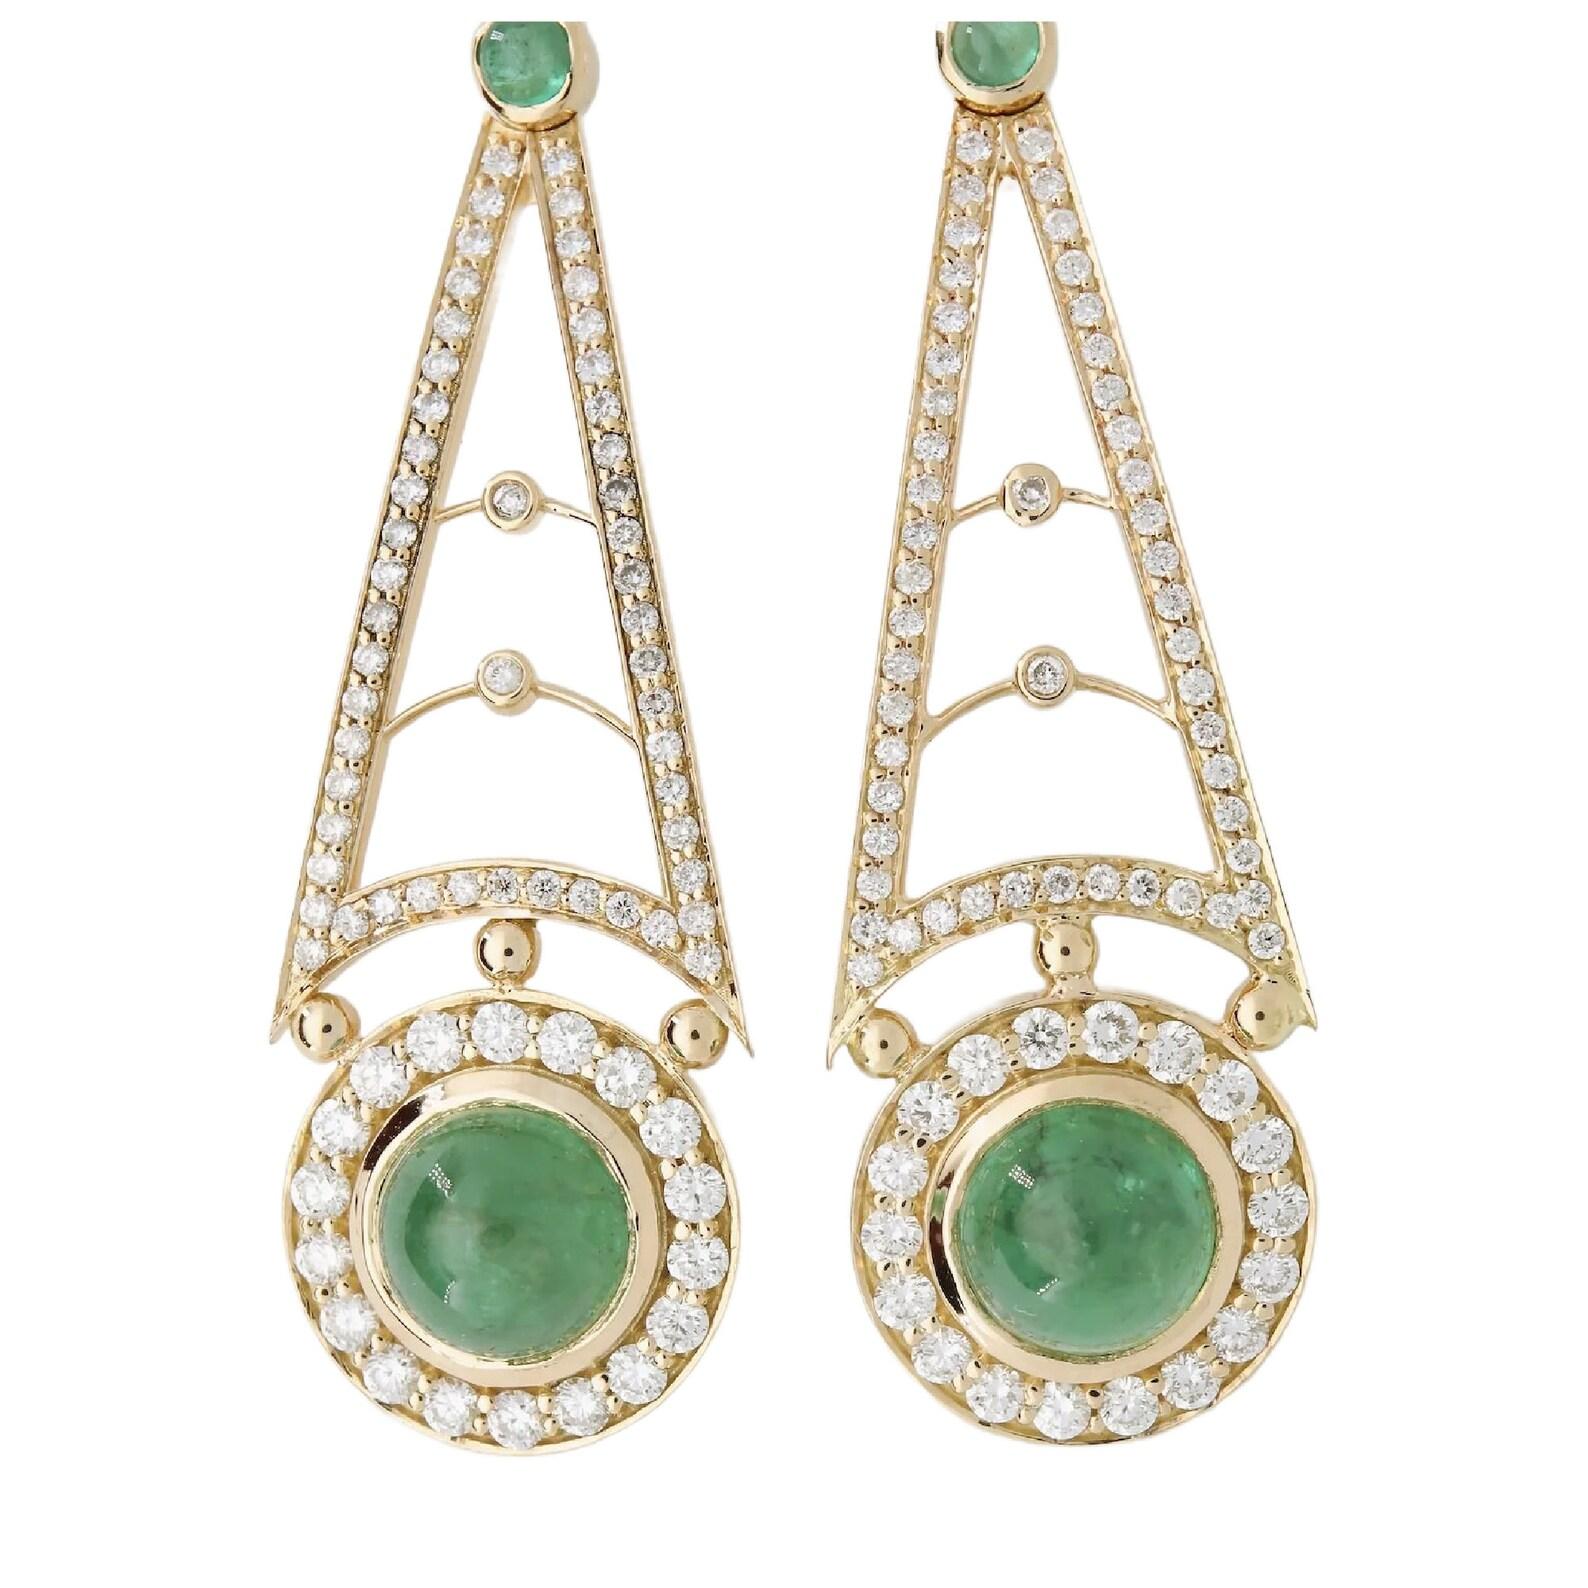 A pair of fine Colombian emerald, and brilliant cut diamond earrings in 18 karat gold. Featuring cabochon cut emerald drops encircled by brilliant cut diamonds, and suspended from pave set diamonds accented by further bezel set emeralds. Centering